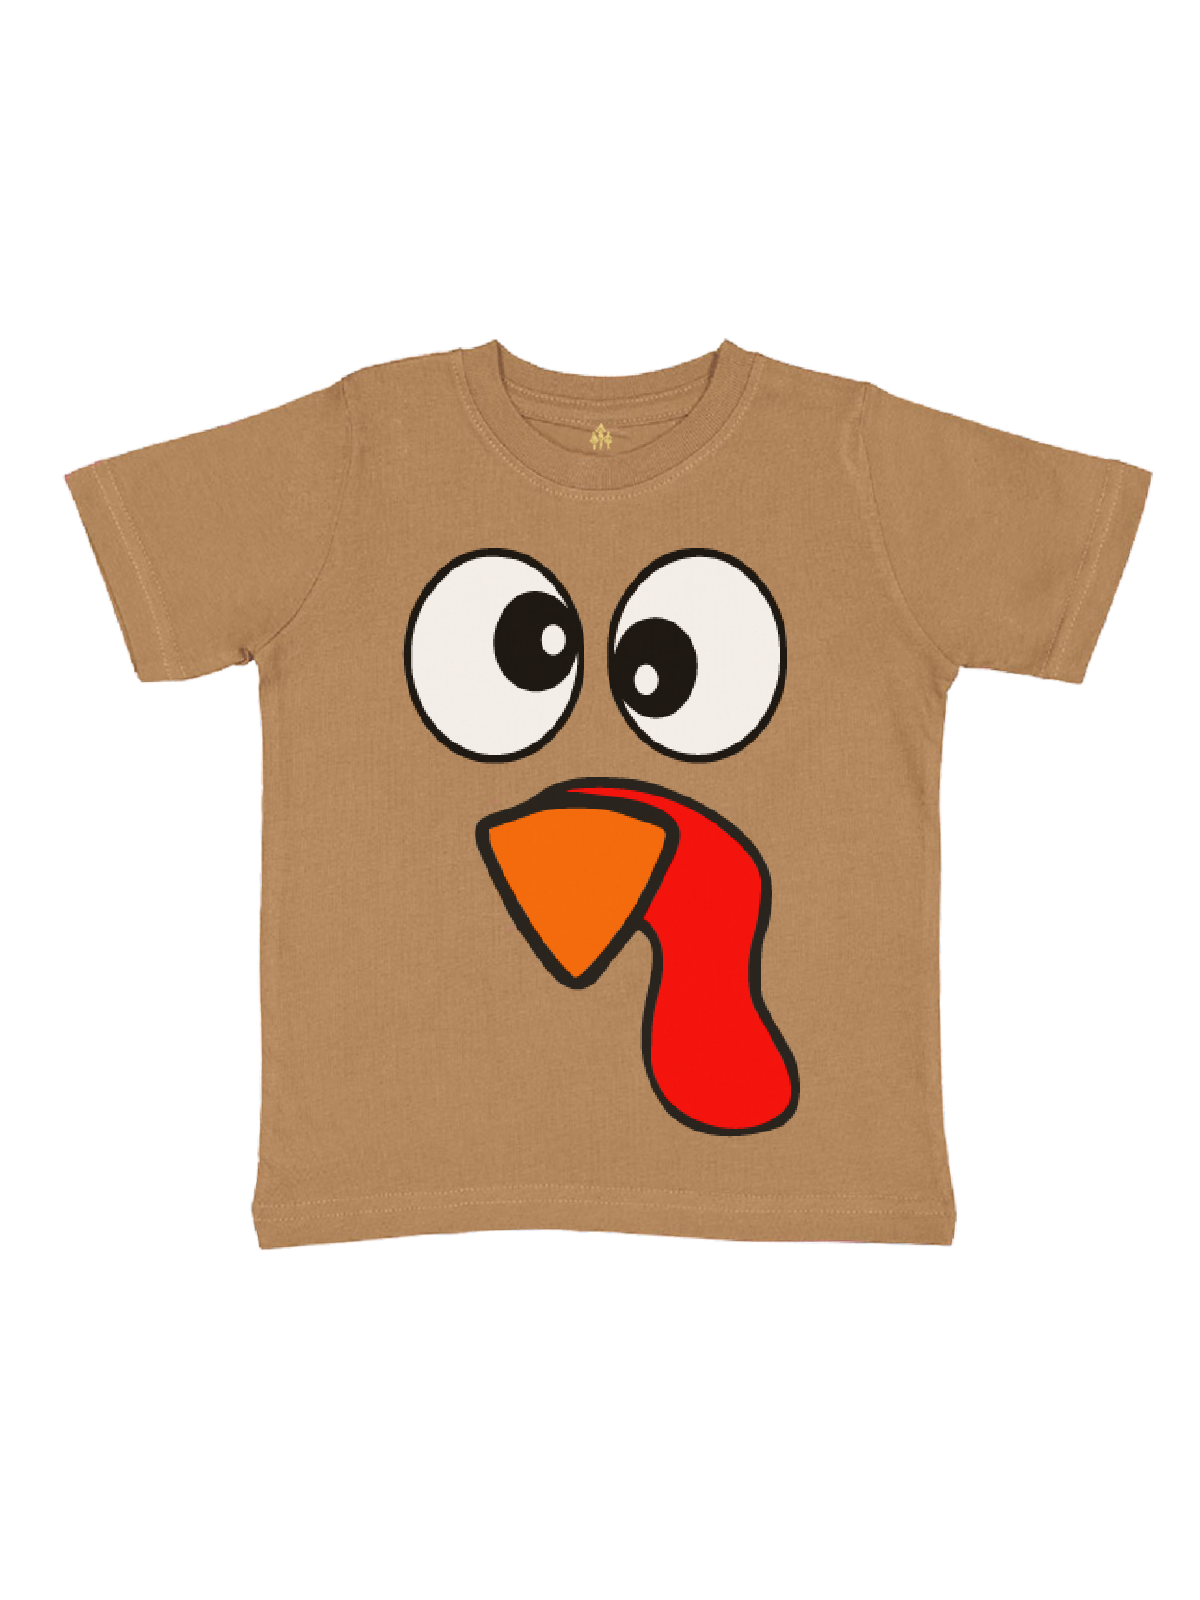 Silly Turkey Face Kids Thanksgiving Shirt in Coyote Brown